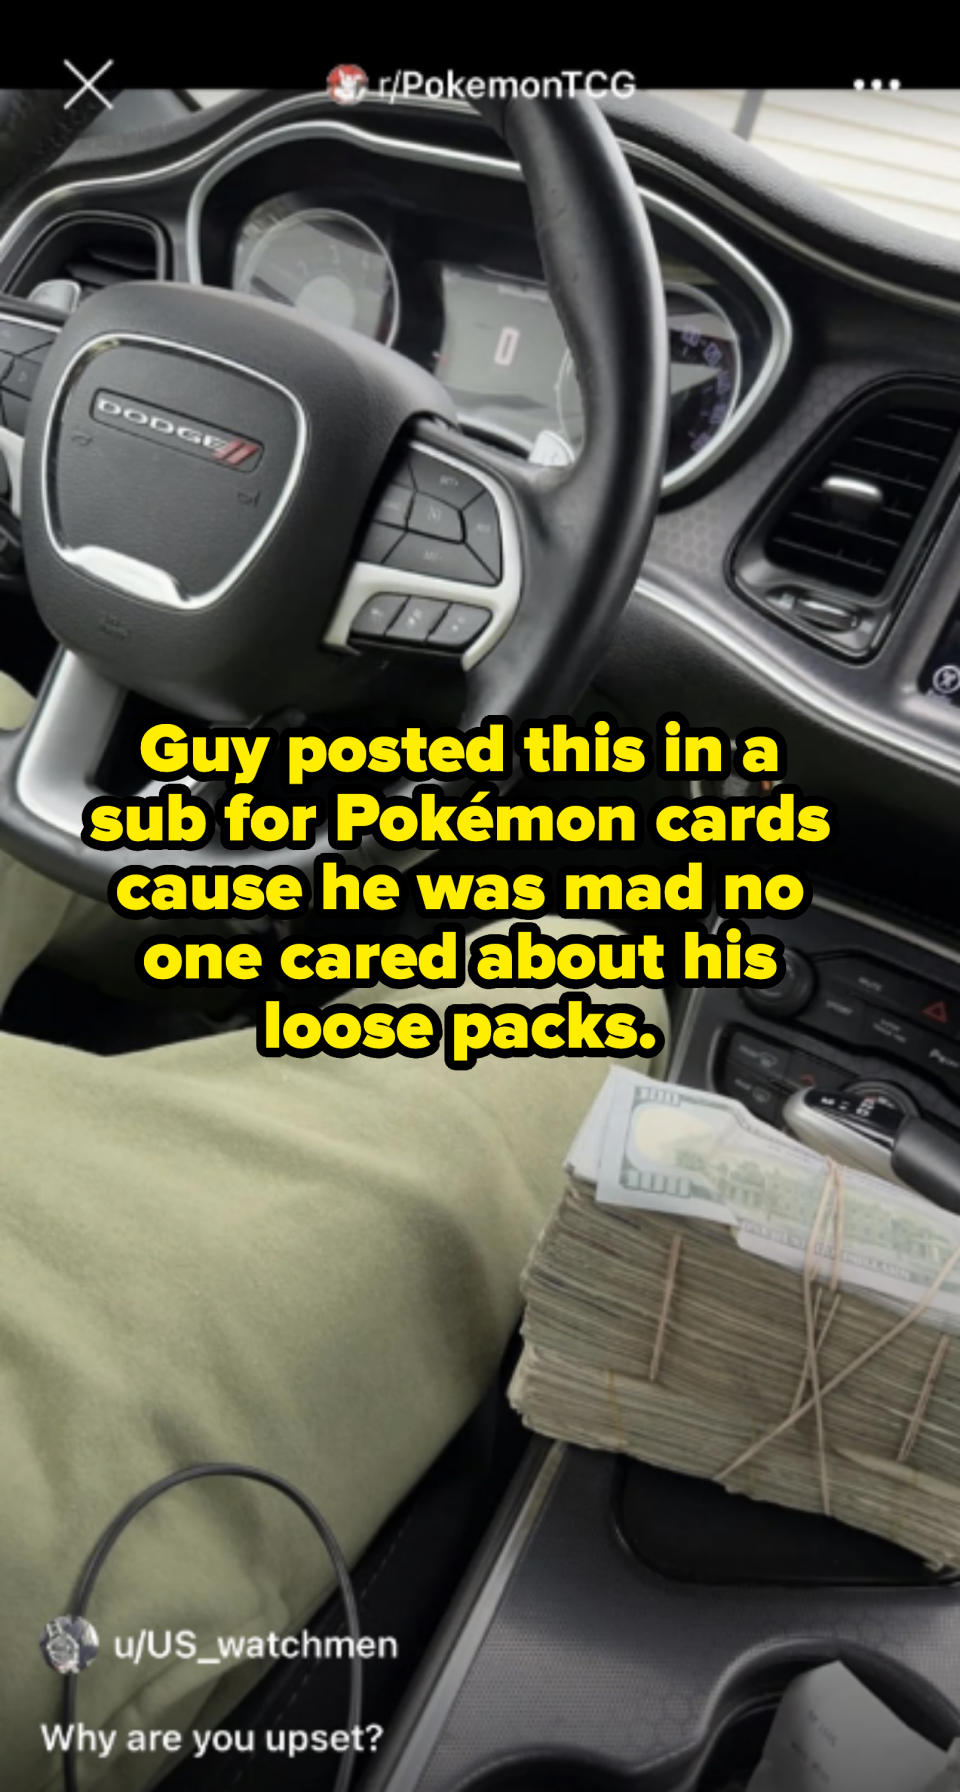 A person is sitting in the driver's seat of a car with a visible name 'Dodge' on the steering wheel. They have a large stack of money on their lap. Text in the image reads "u/US_watchmen Why are you upset?"